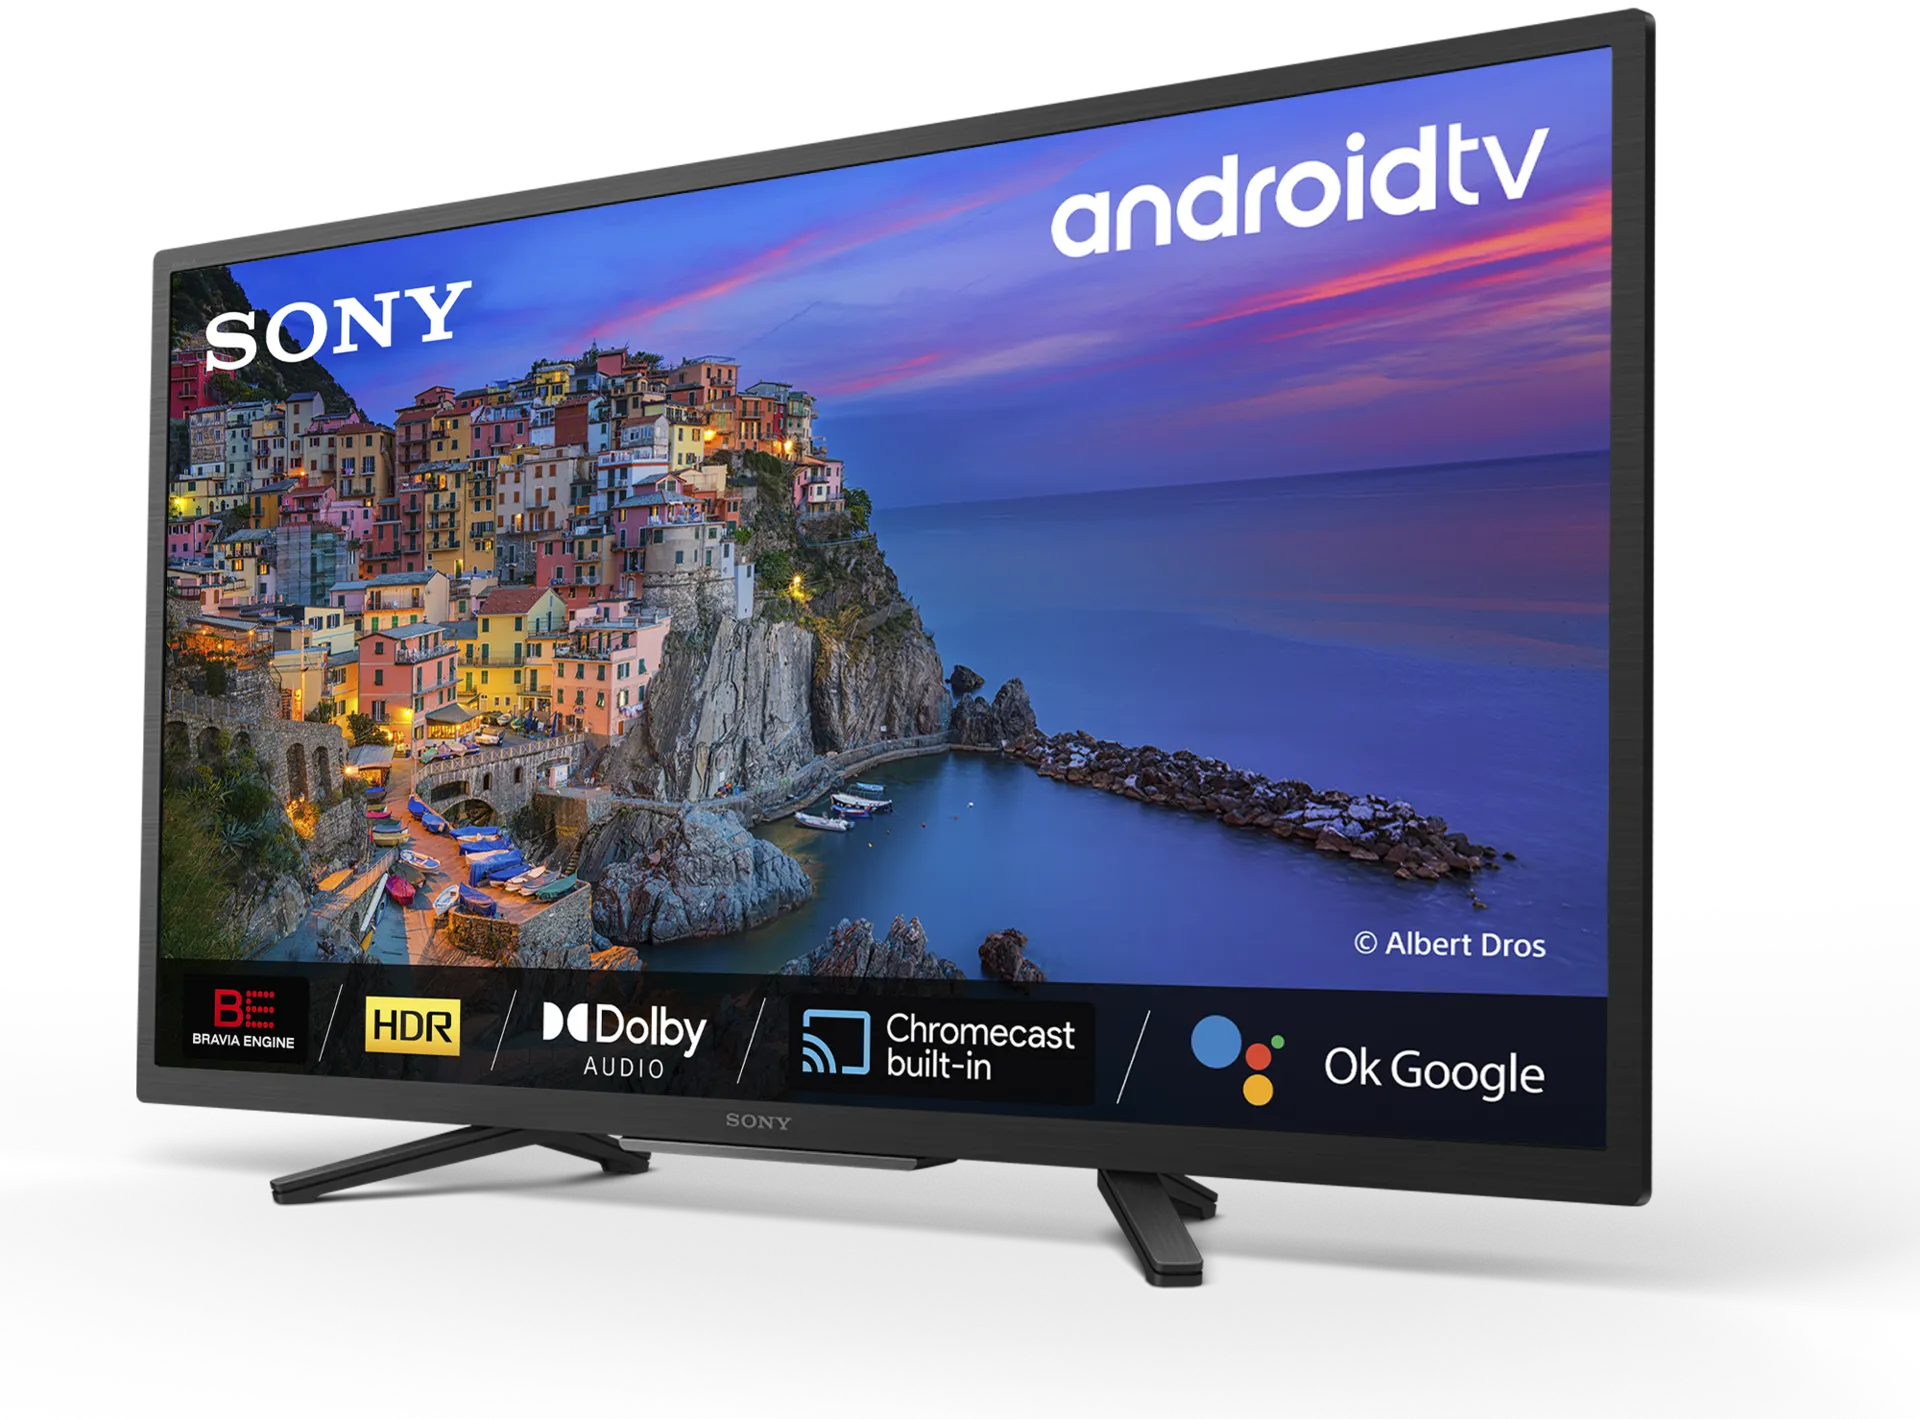 Sony KD-32W804 32" HD Ready Android Smart TV - 3